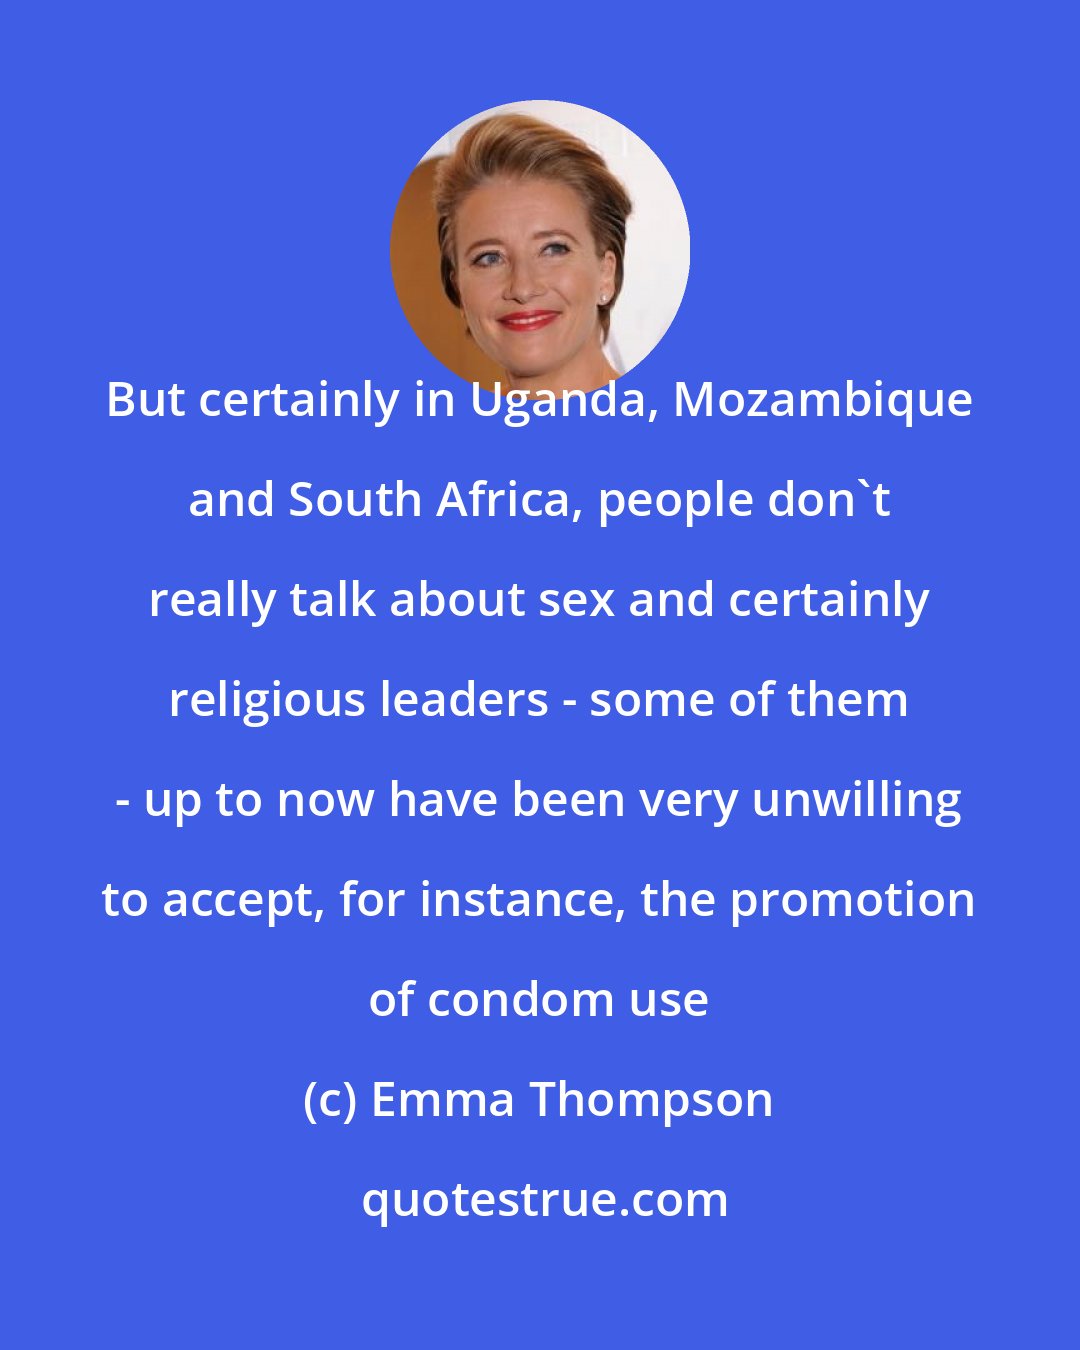 Emma Thompson: But certainly in Uganda, Mozambique and South Africa, people don't really talk about sex and certainly religious leaders - some of them - up to now have been very unwilling to accept, for instance, the promotion of condom use